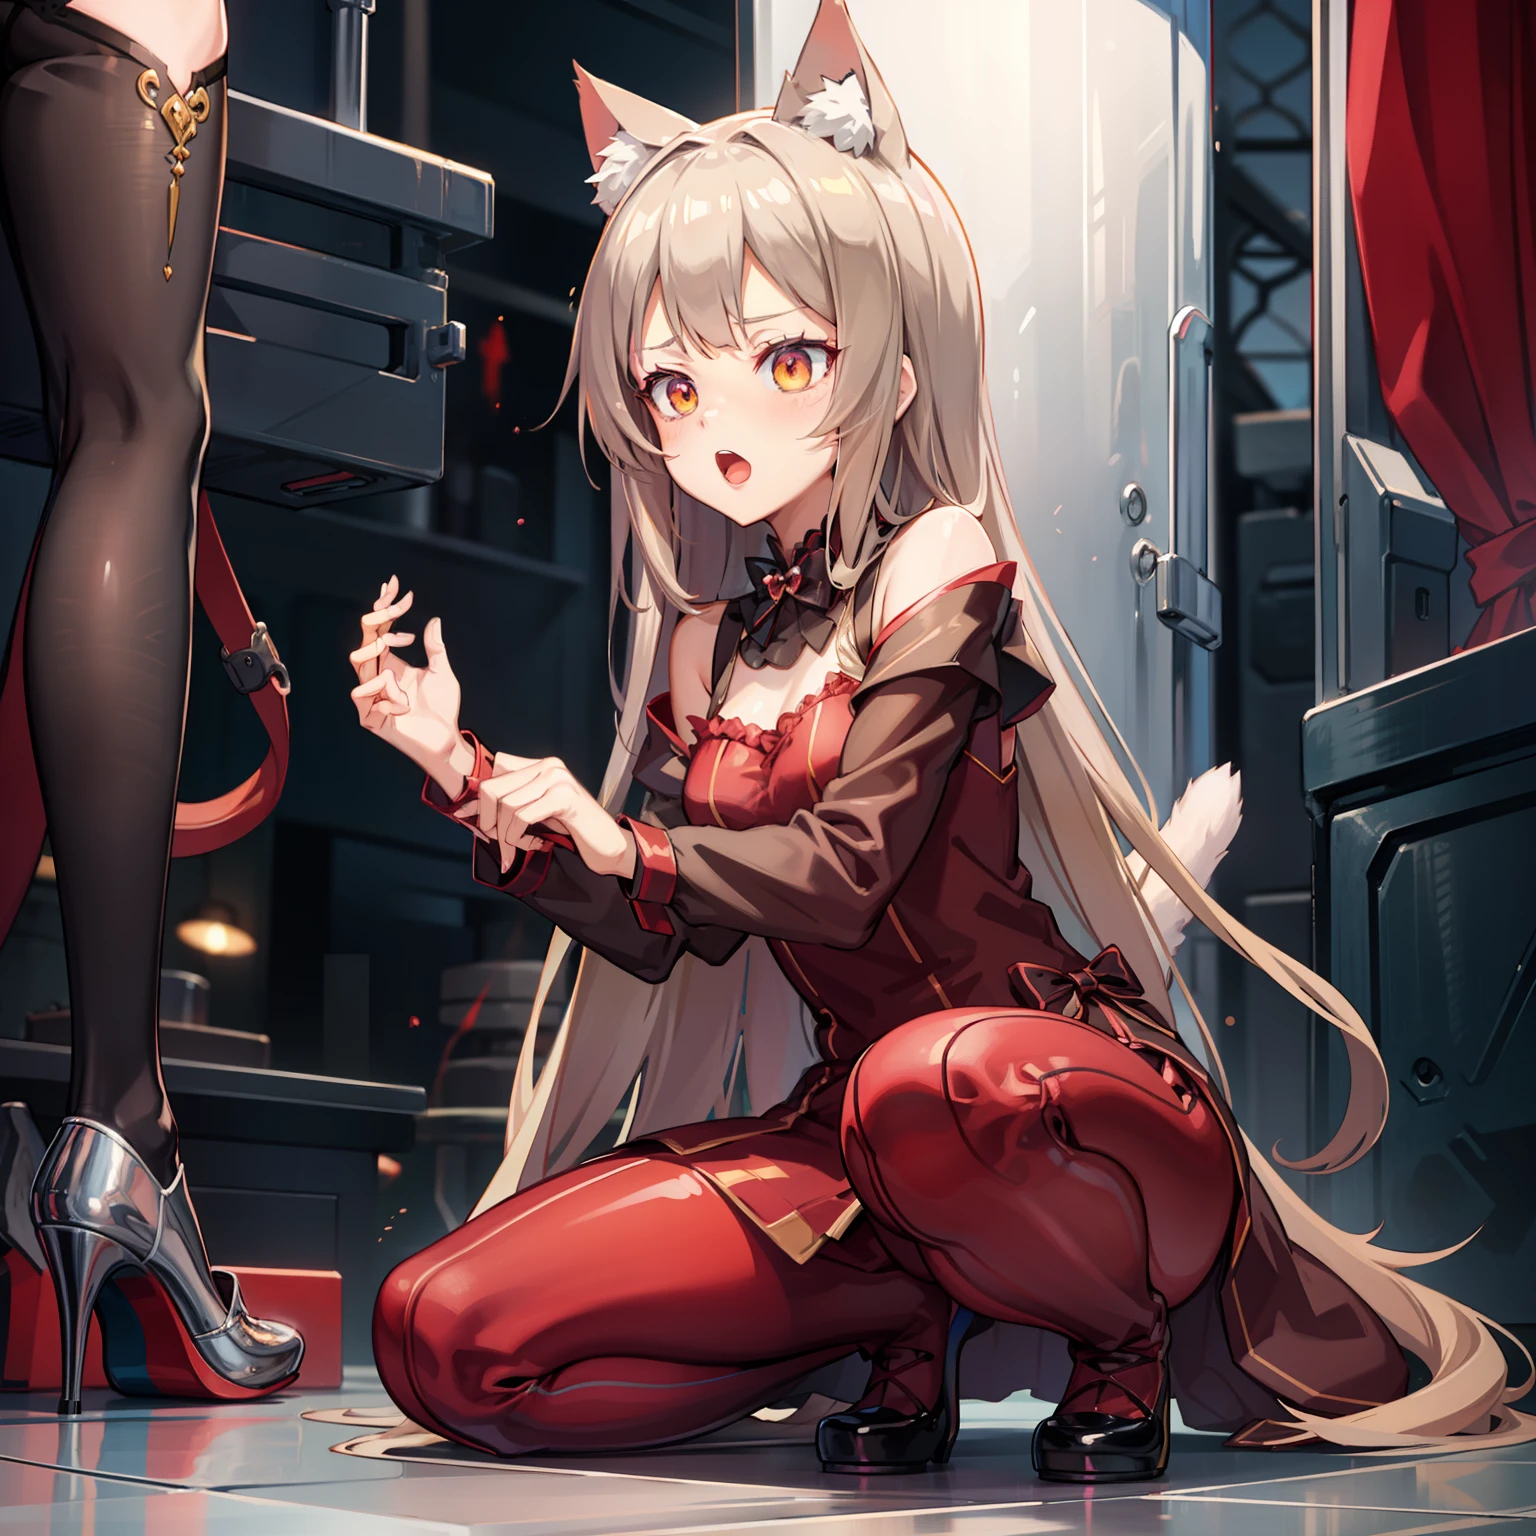 Anime girl in a red dress stroking a cat on the ground, attractive cat girl, beautiful young catgirl, beautiful anime catgirl, very beautiful cute catgirl, Vlop and Sakimichan, anime cat girl, catgirl, ahri, very beautiful anime cat girl, Nixeu and Sakimichan, cat girl, Anime Cat, cute anime catgirl